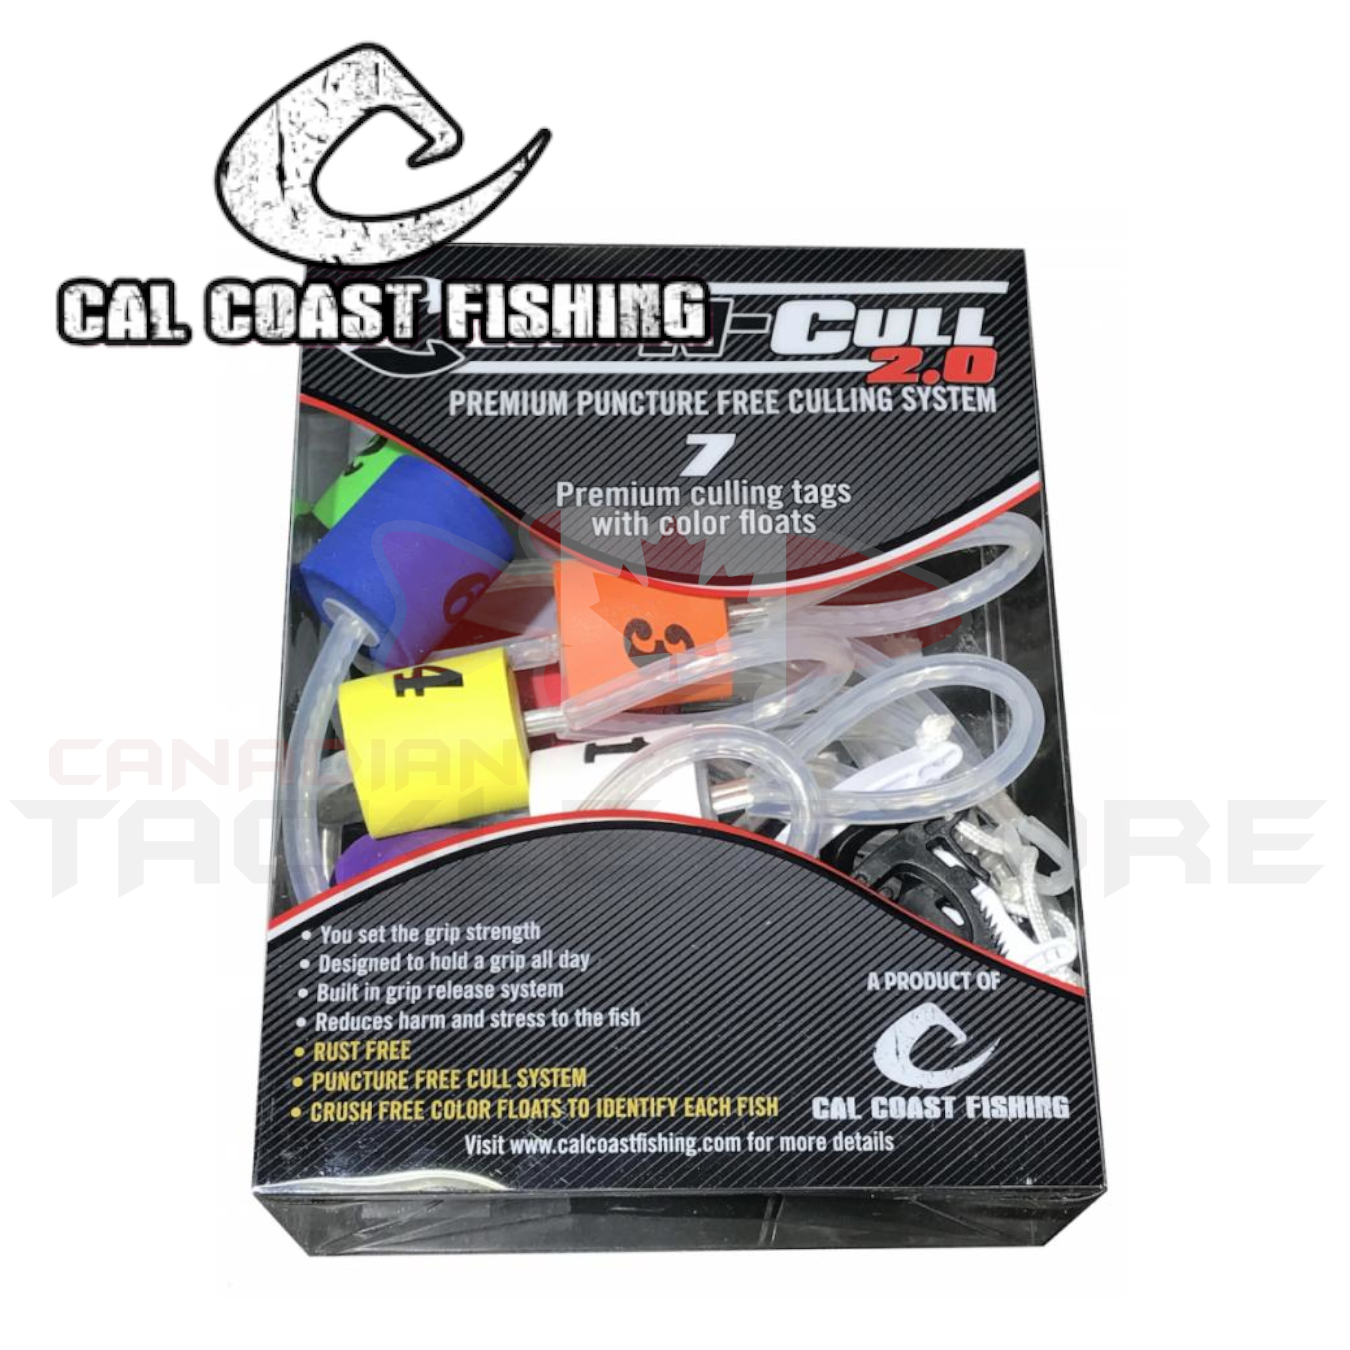 Cal Coast Fishing Clip n Cull 2.0 – Canadian Tackle Store